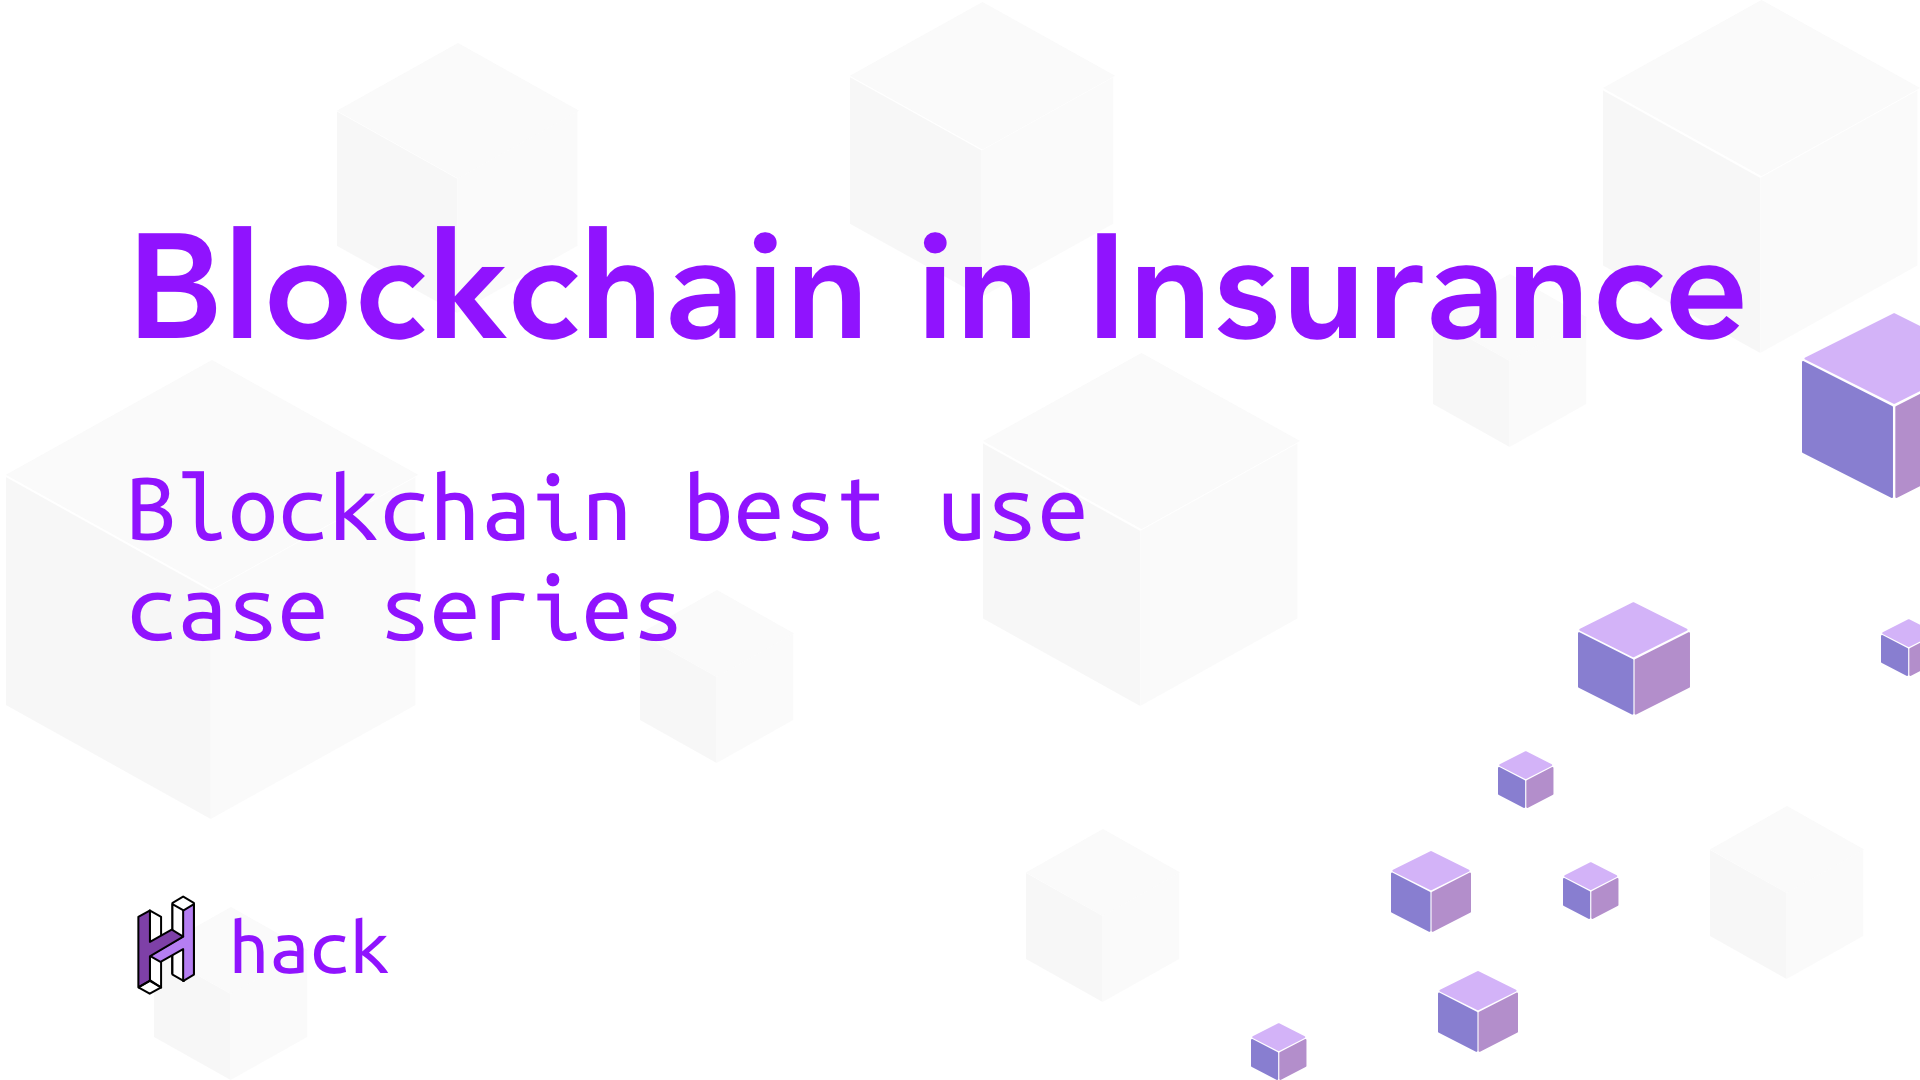 Cover Image for Blockchain in Insurance, the power to improve!